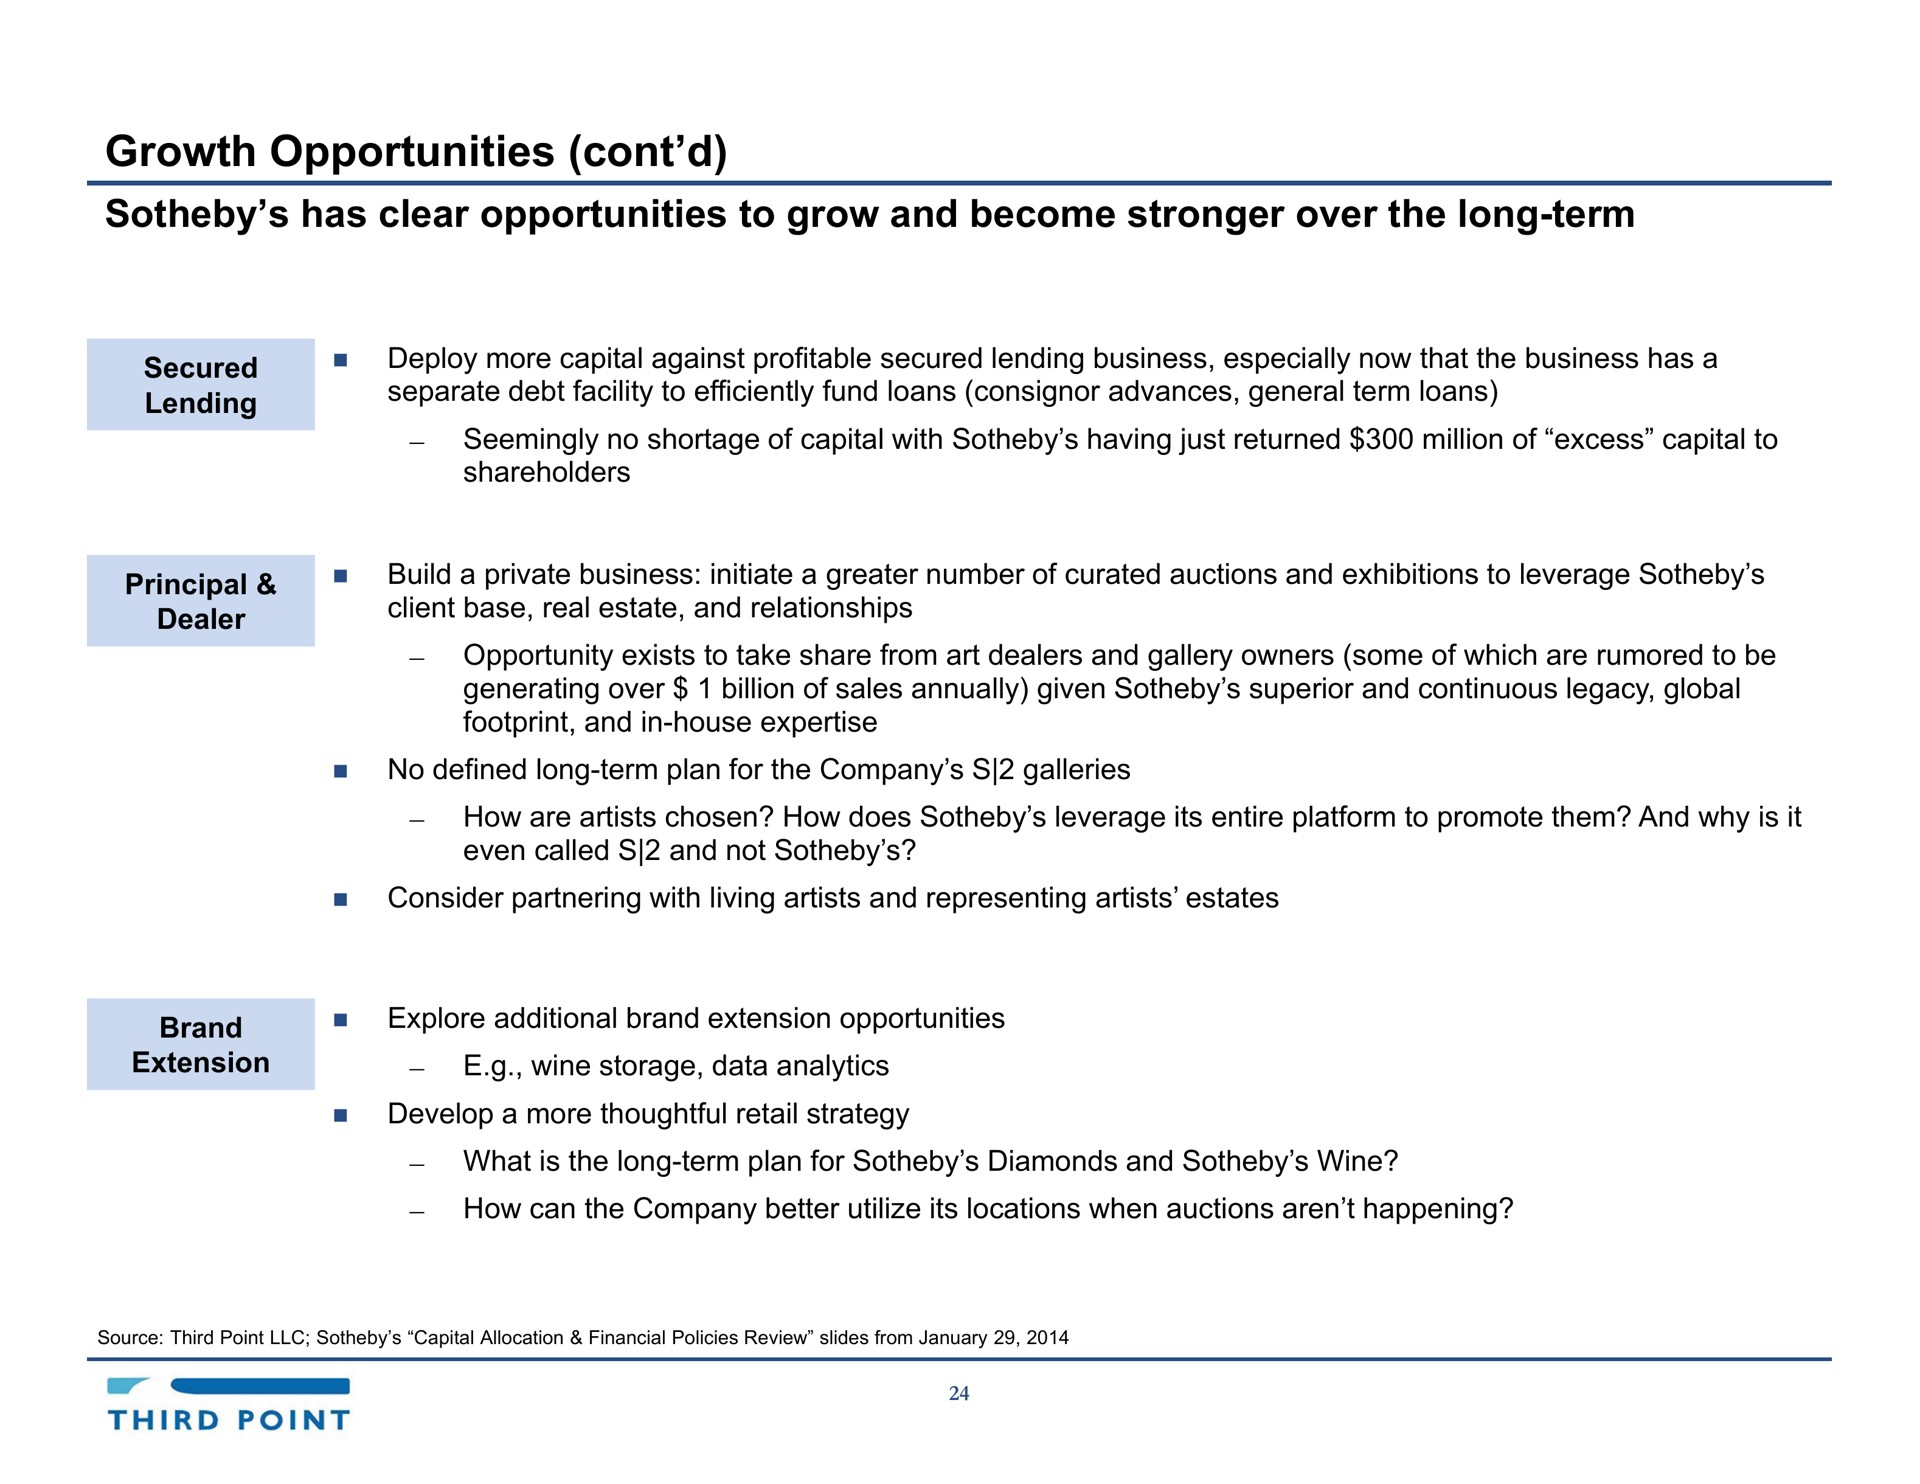 growth opportunities has clear opportunities to grow and become over the long term | Third Point Management